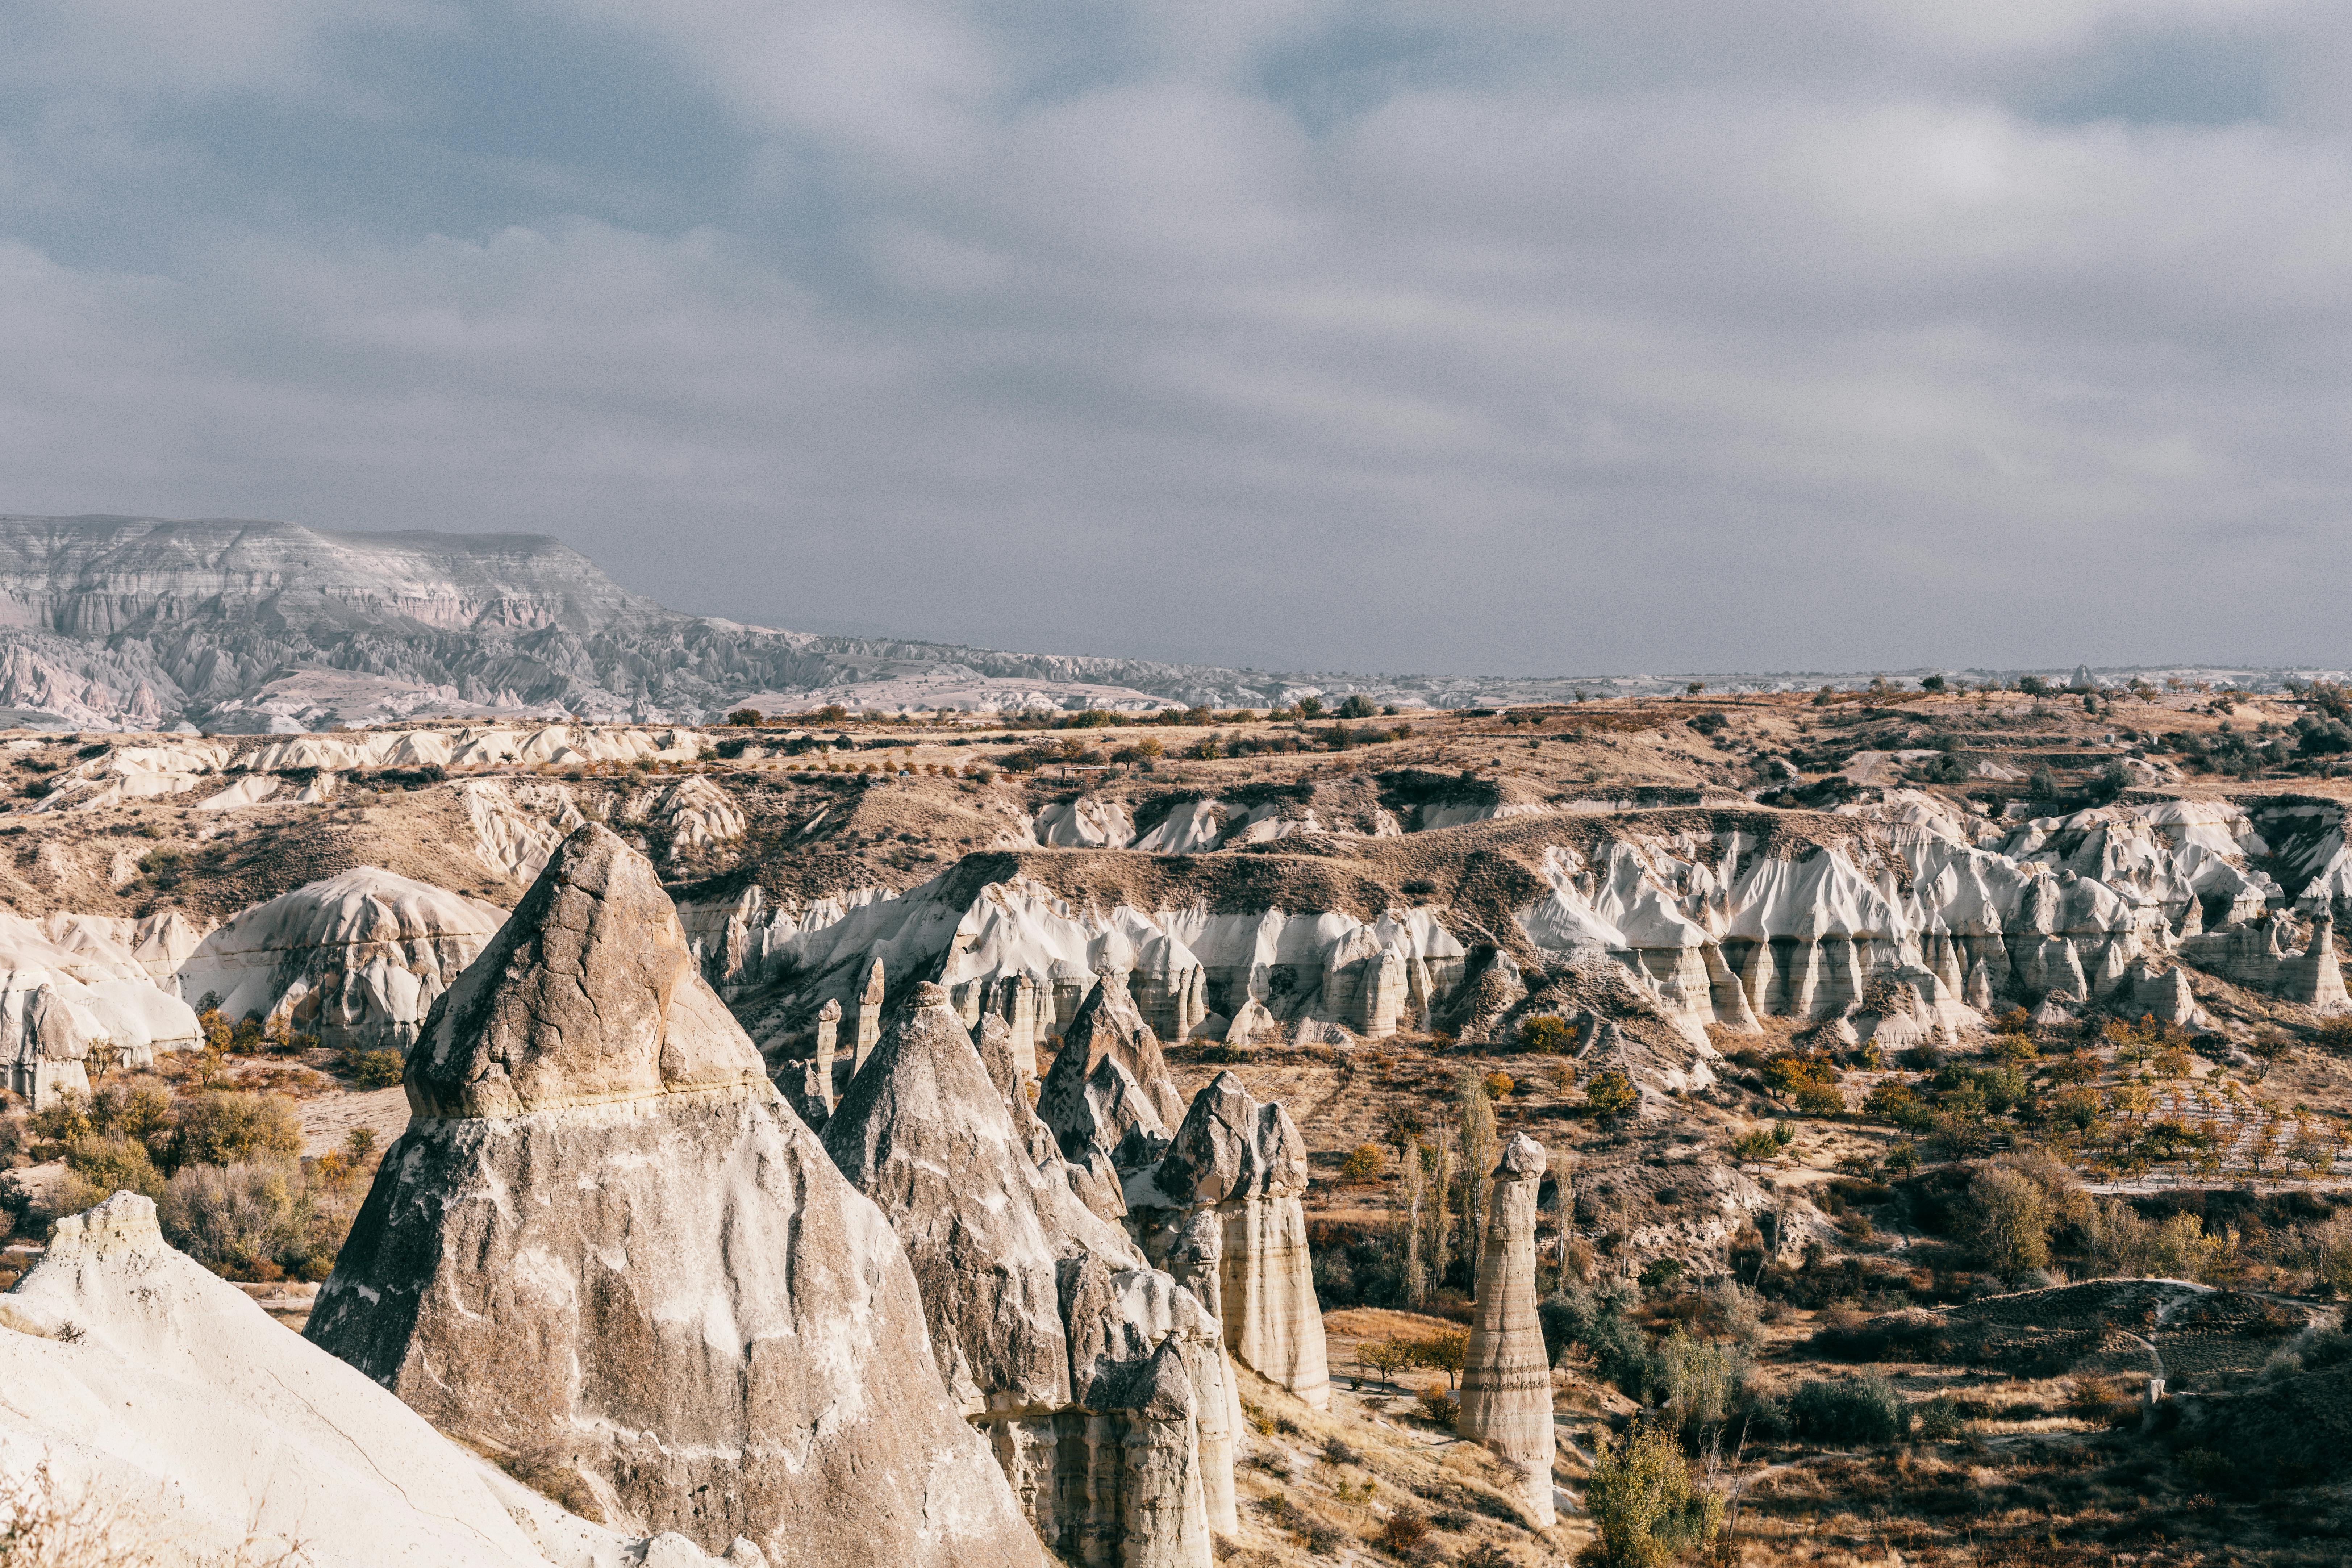 Free Breathtaking landscape of dry rocky formations near uneven mountains in valley with plants and bushes in Turkey in Cappadocia region in summer day under gray cloudy sky Stock Photo